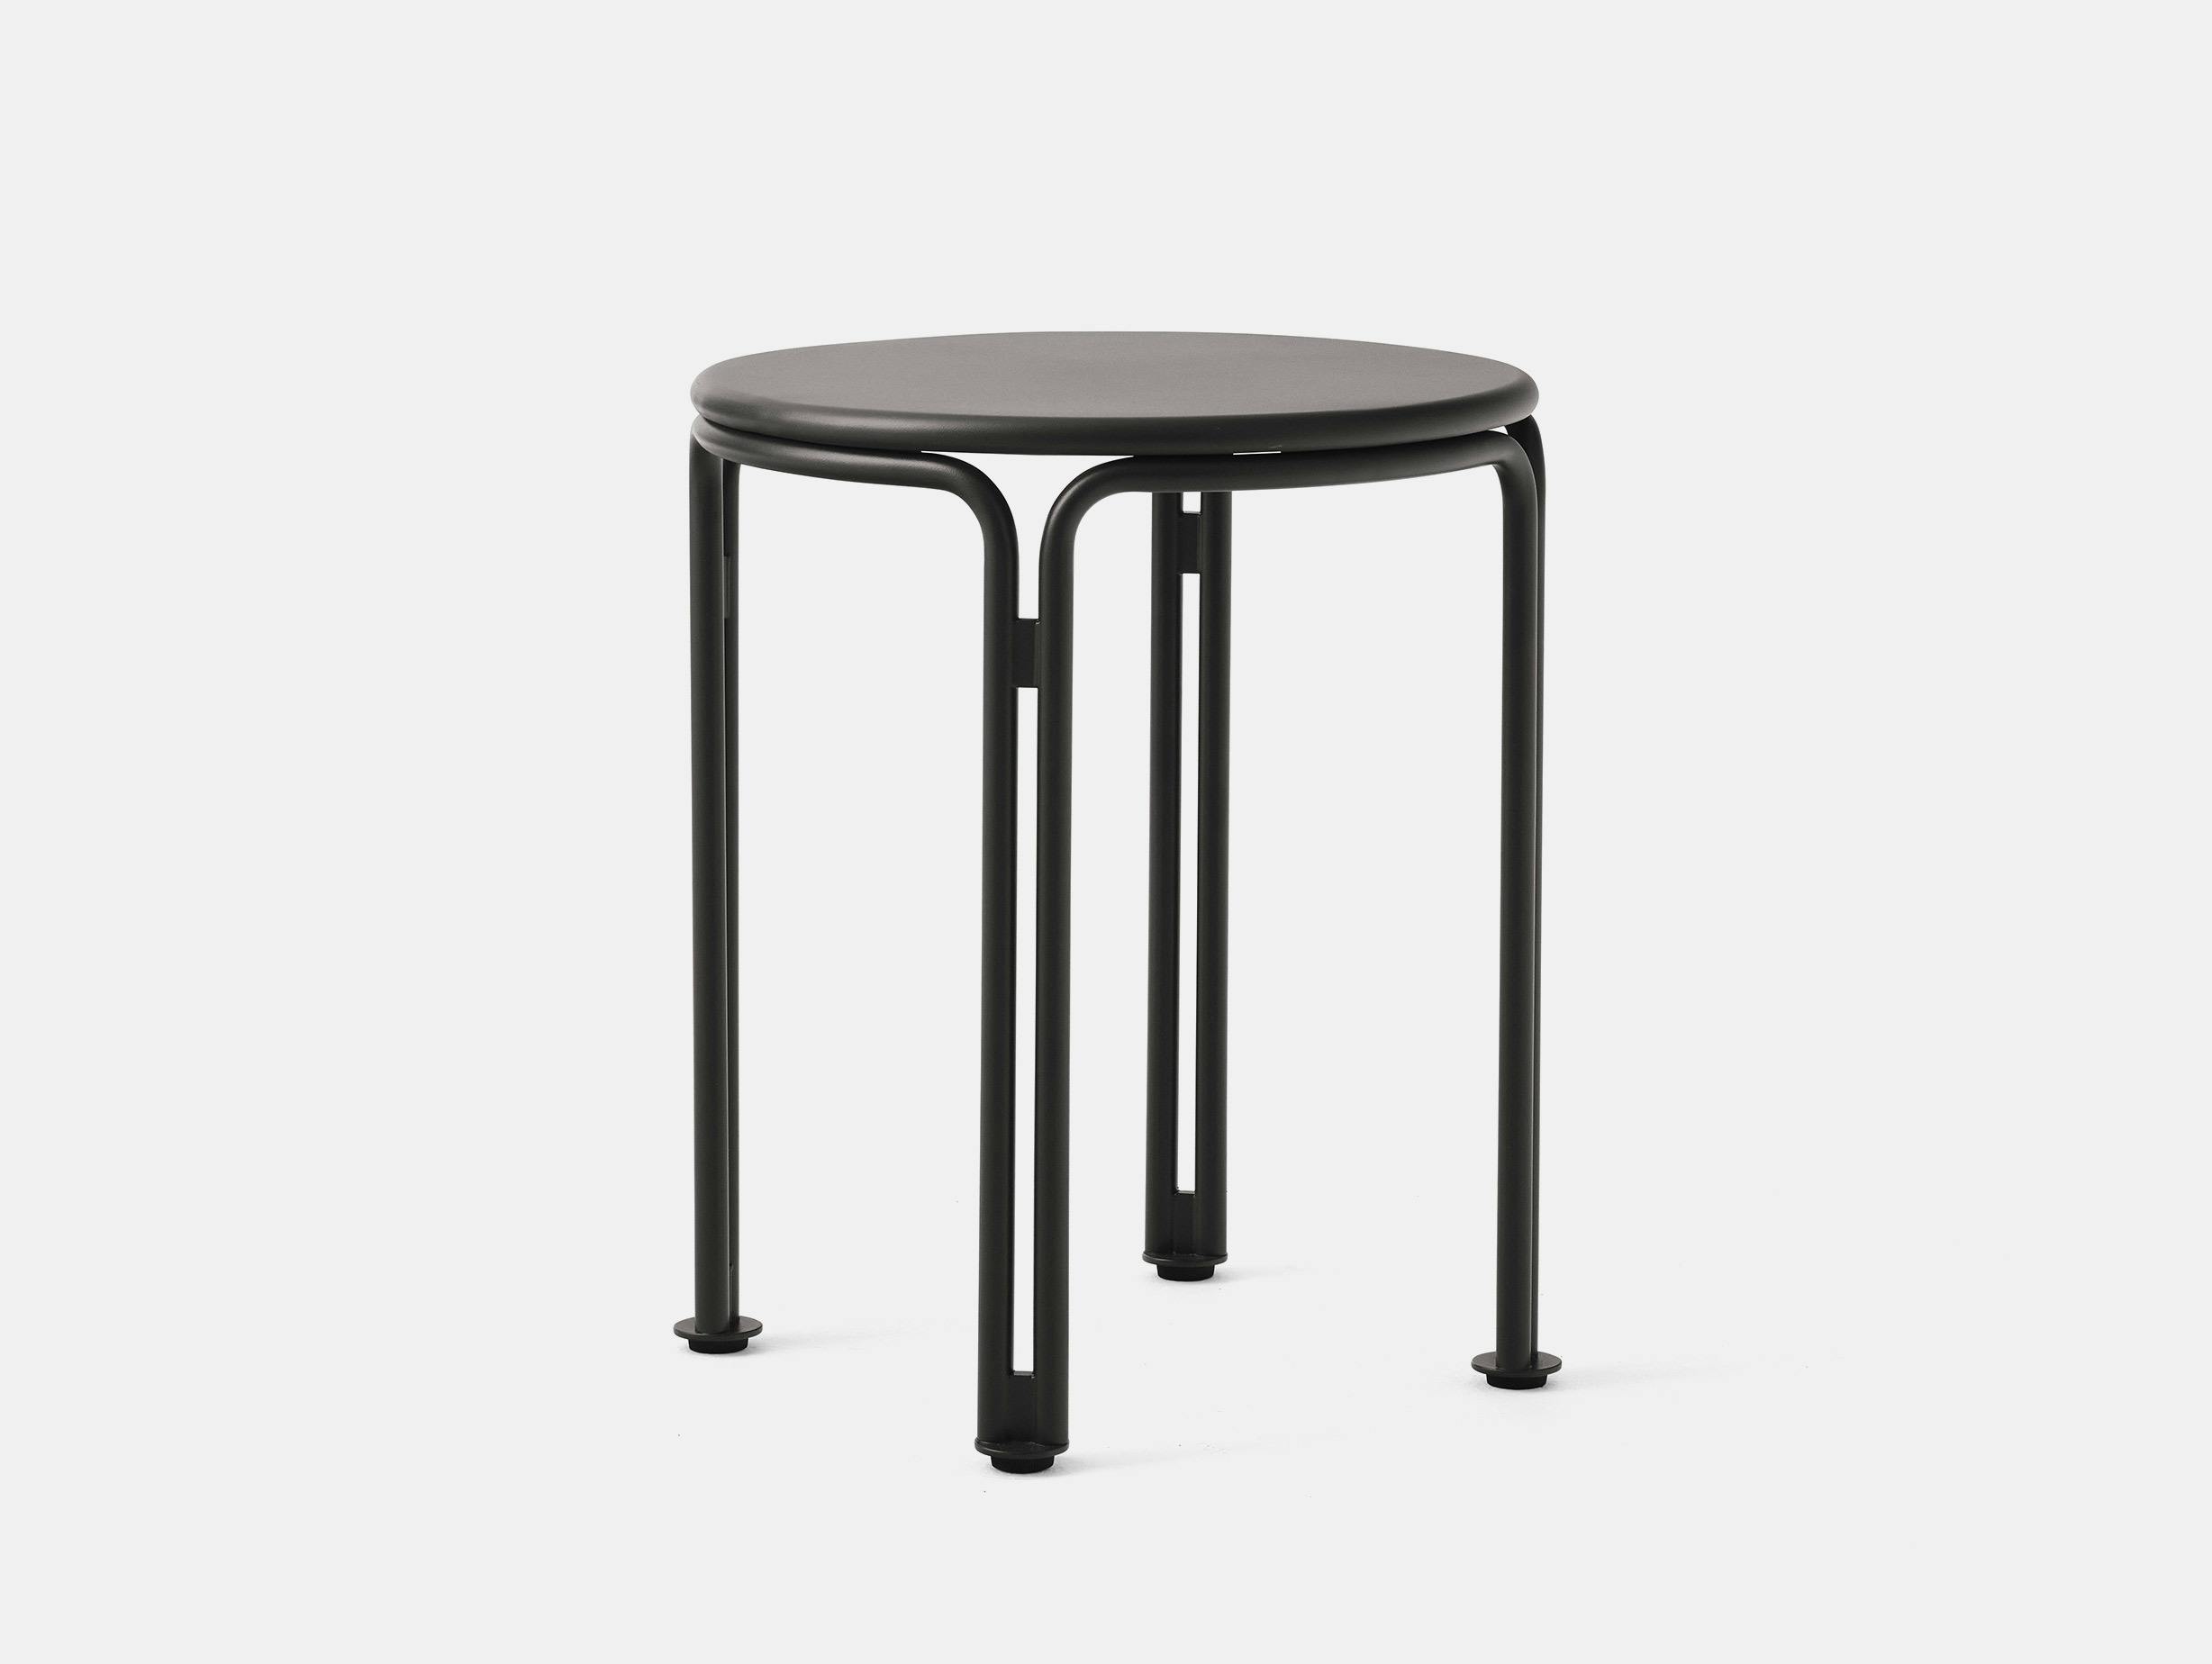 Tradition Space Copenhagen Thorvald Side Table Warm Black